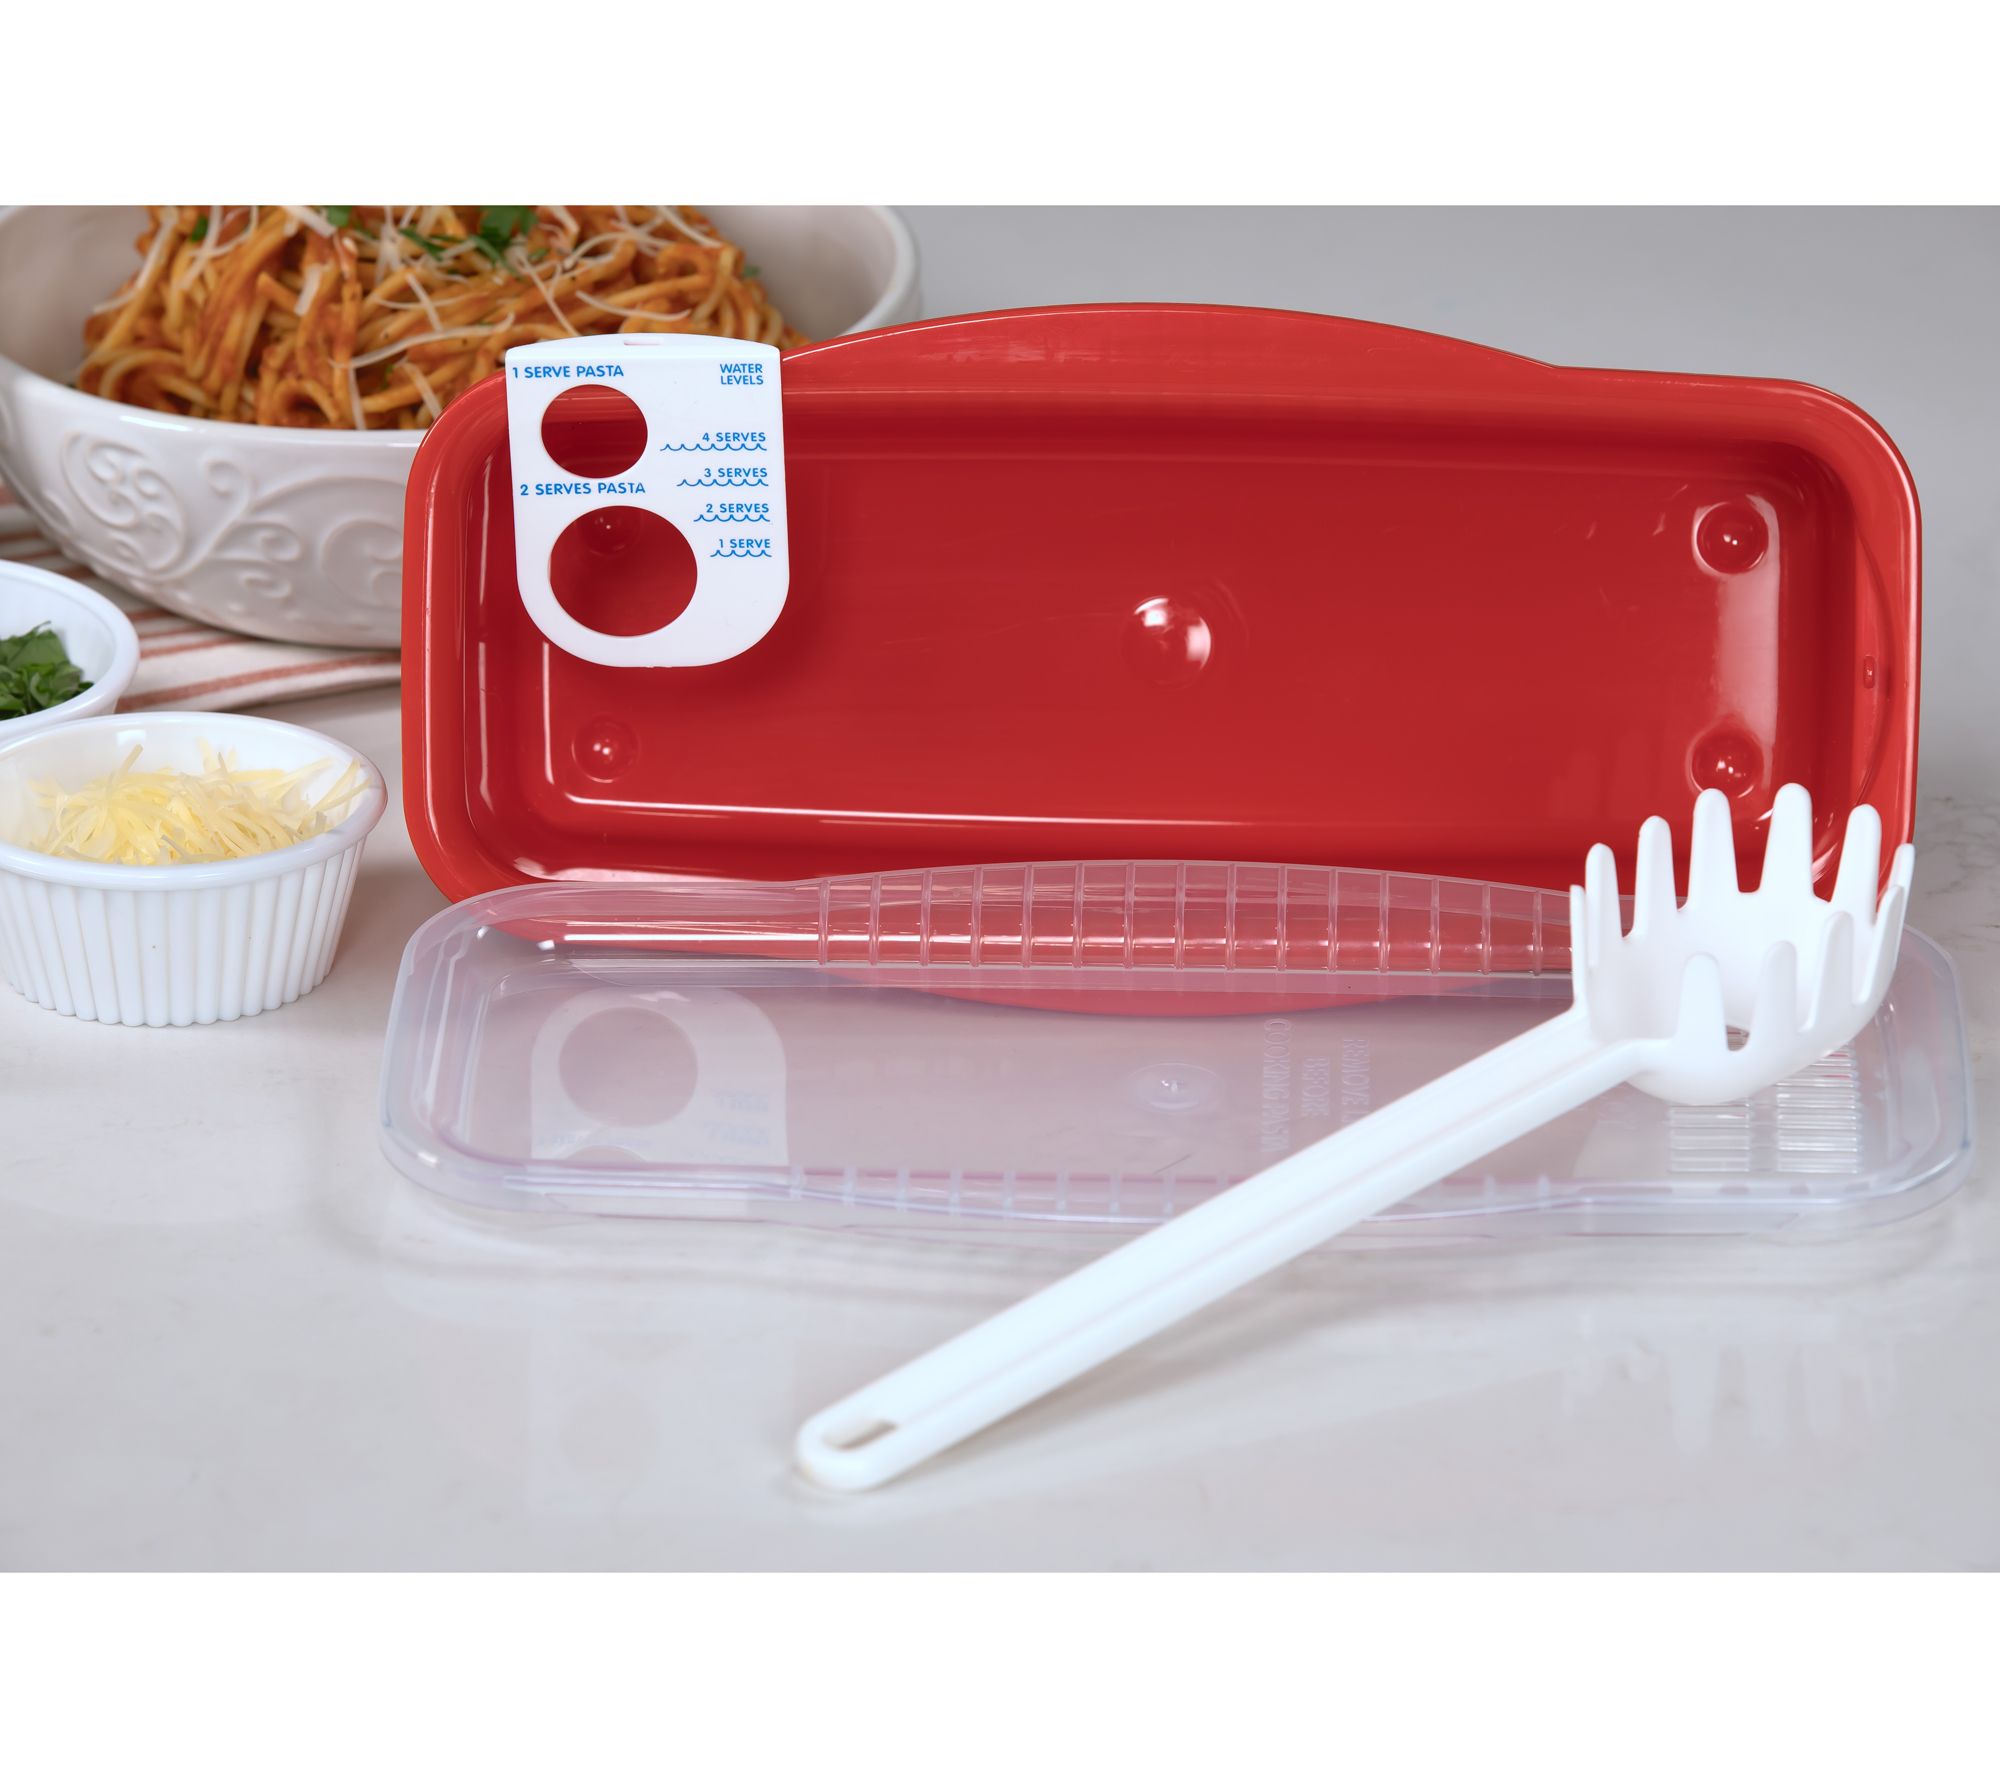 Microwave Pasta Cooker Spaghetti Cooking Tool Noodles Kitchen